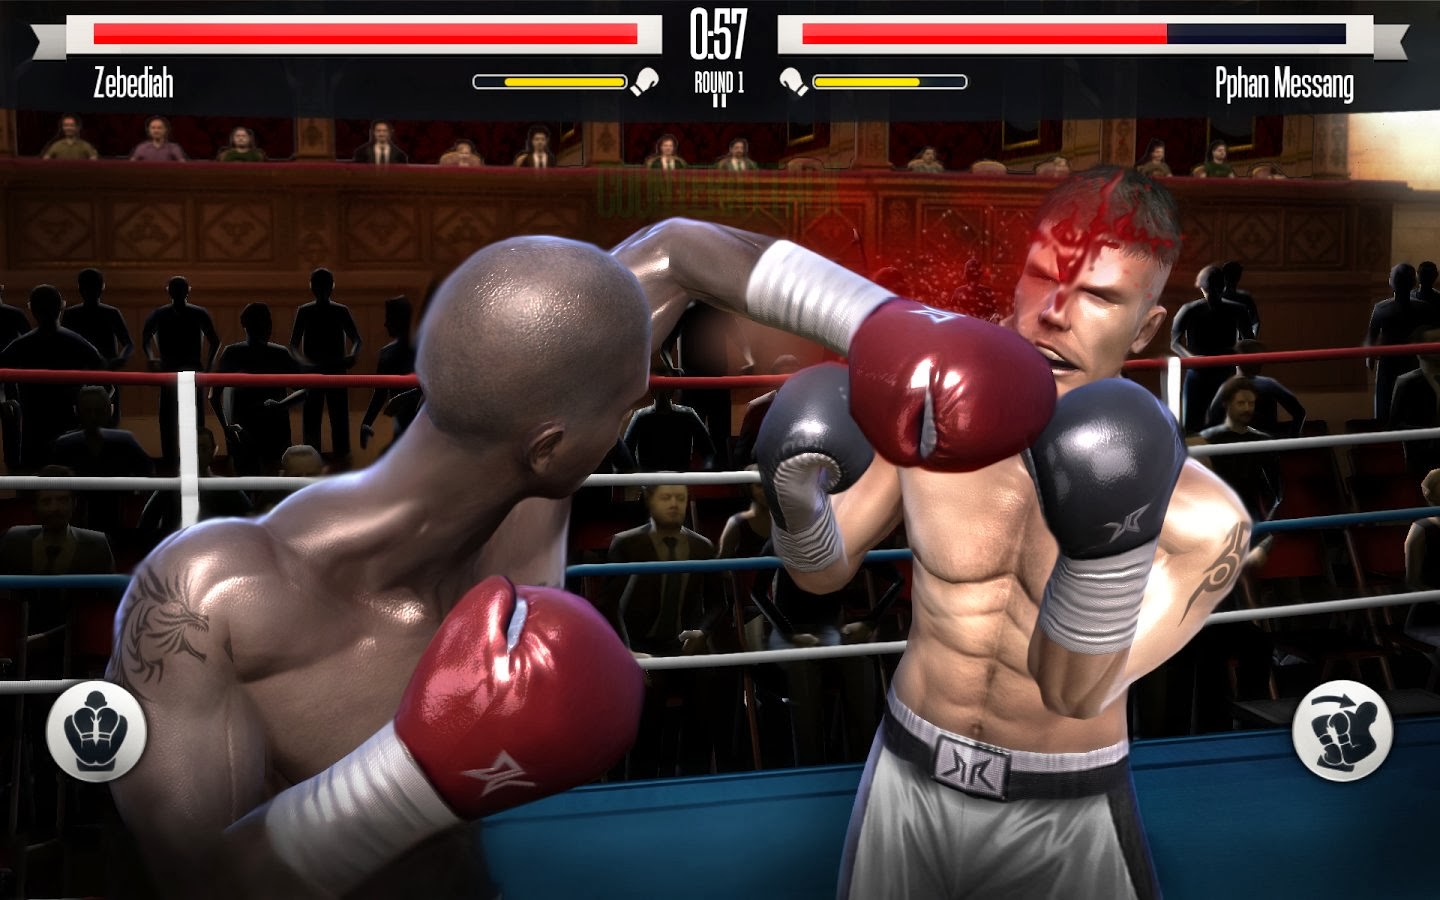 Untilited boxing game. Реал бокс игра. Игра Реал боксинг игра игра Реал боксинг. Real Boxing 2 боксеры. Реал боксинг 4.